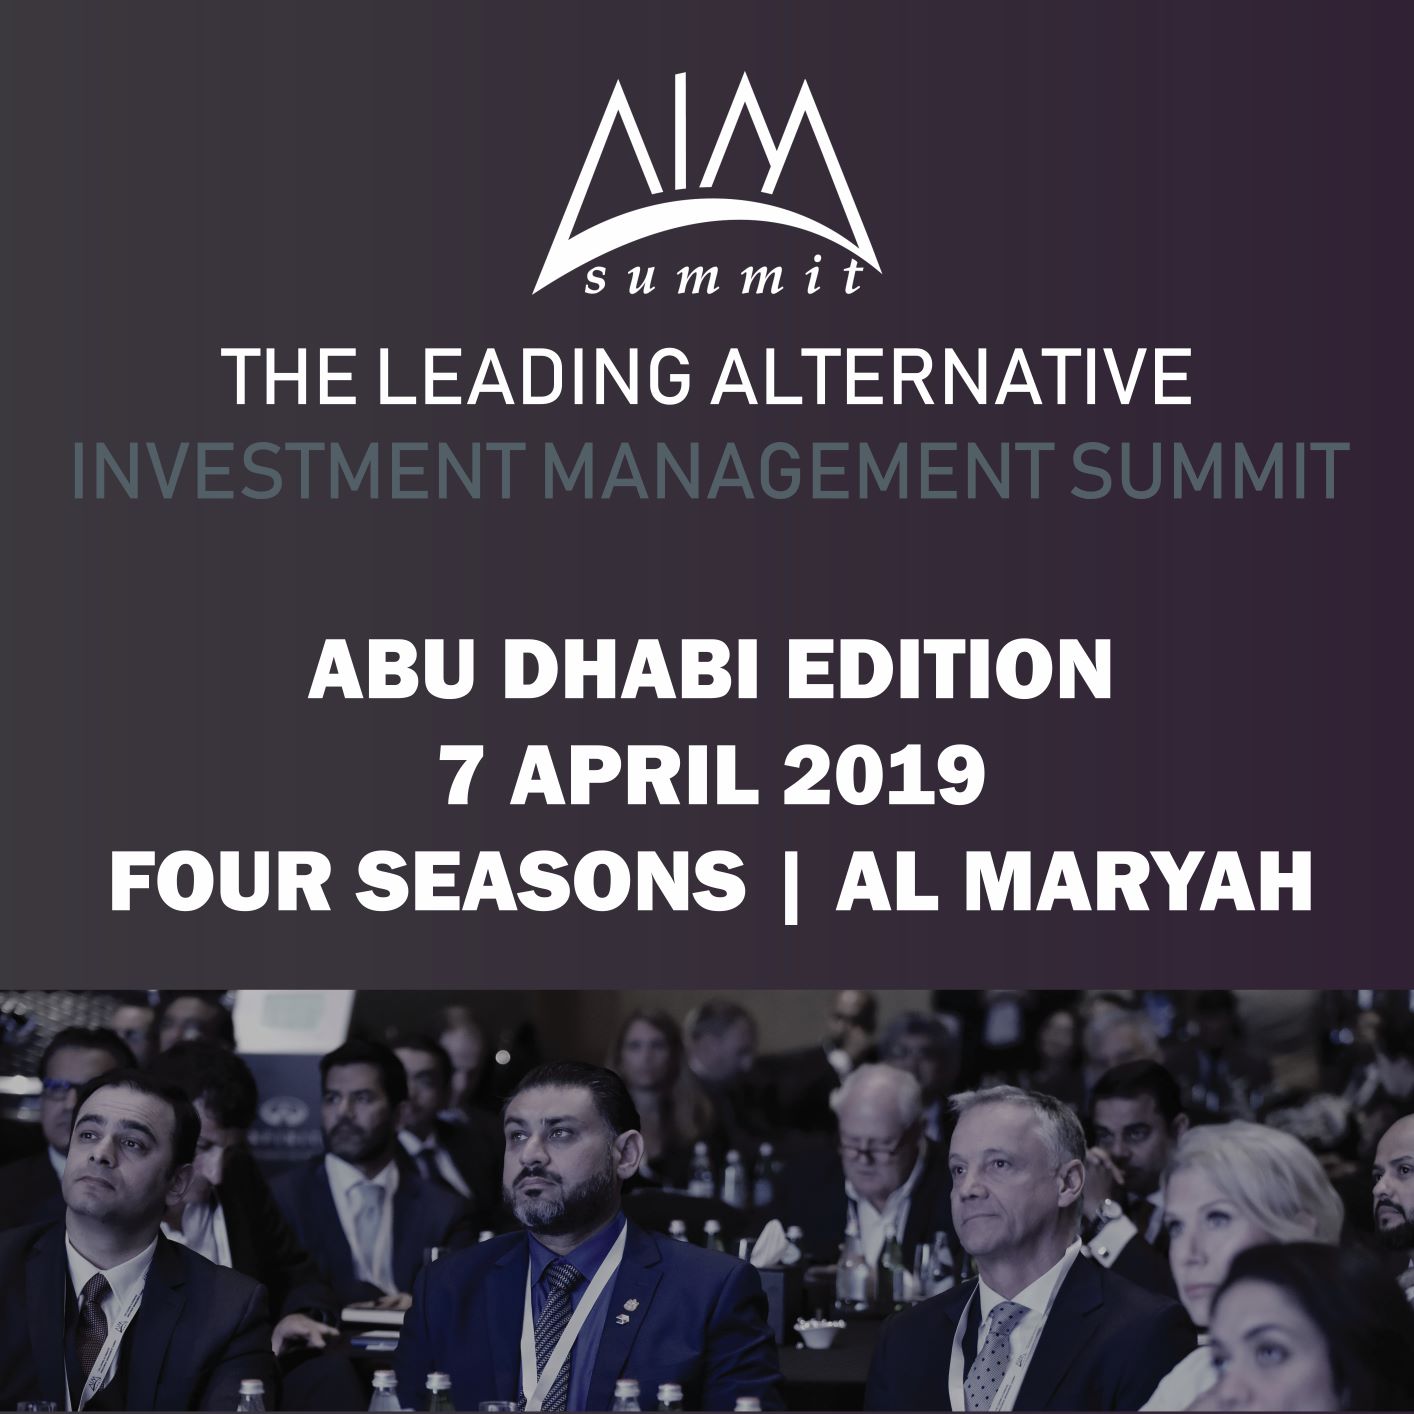 The Leading Alternative Investment Management Summit organized by AIM Summit